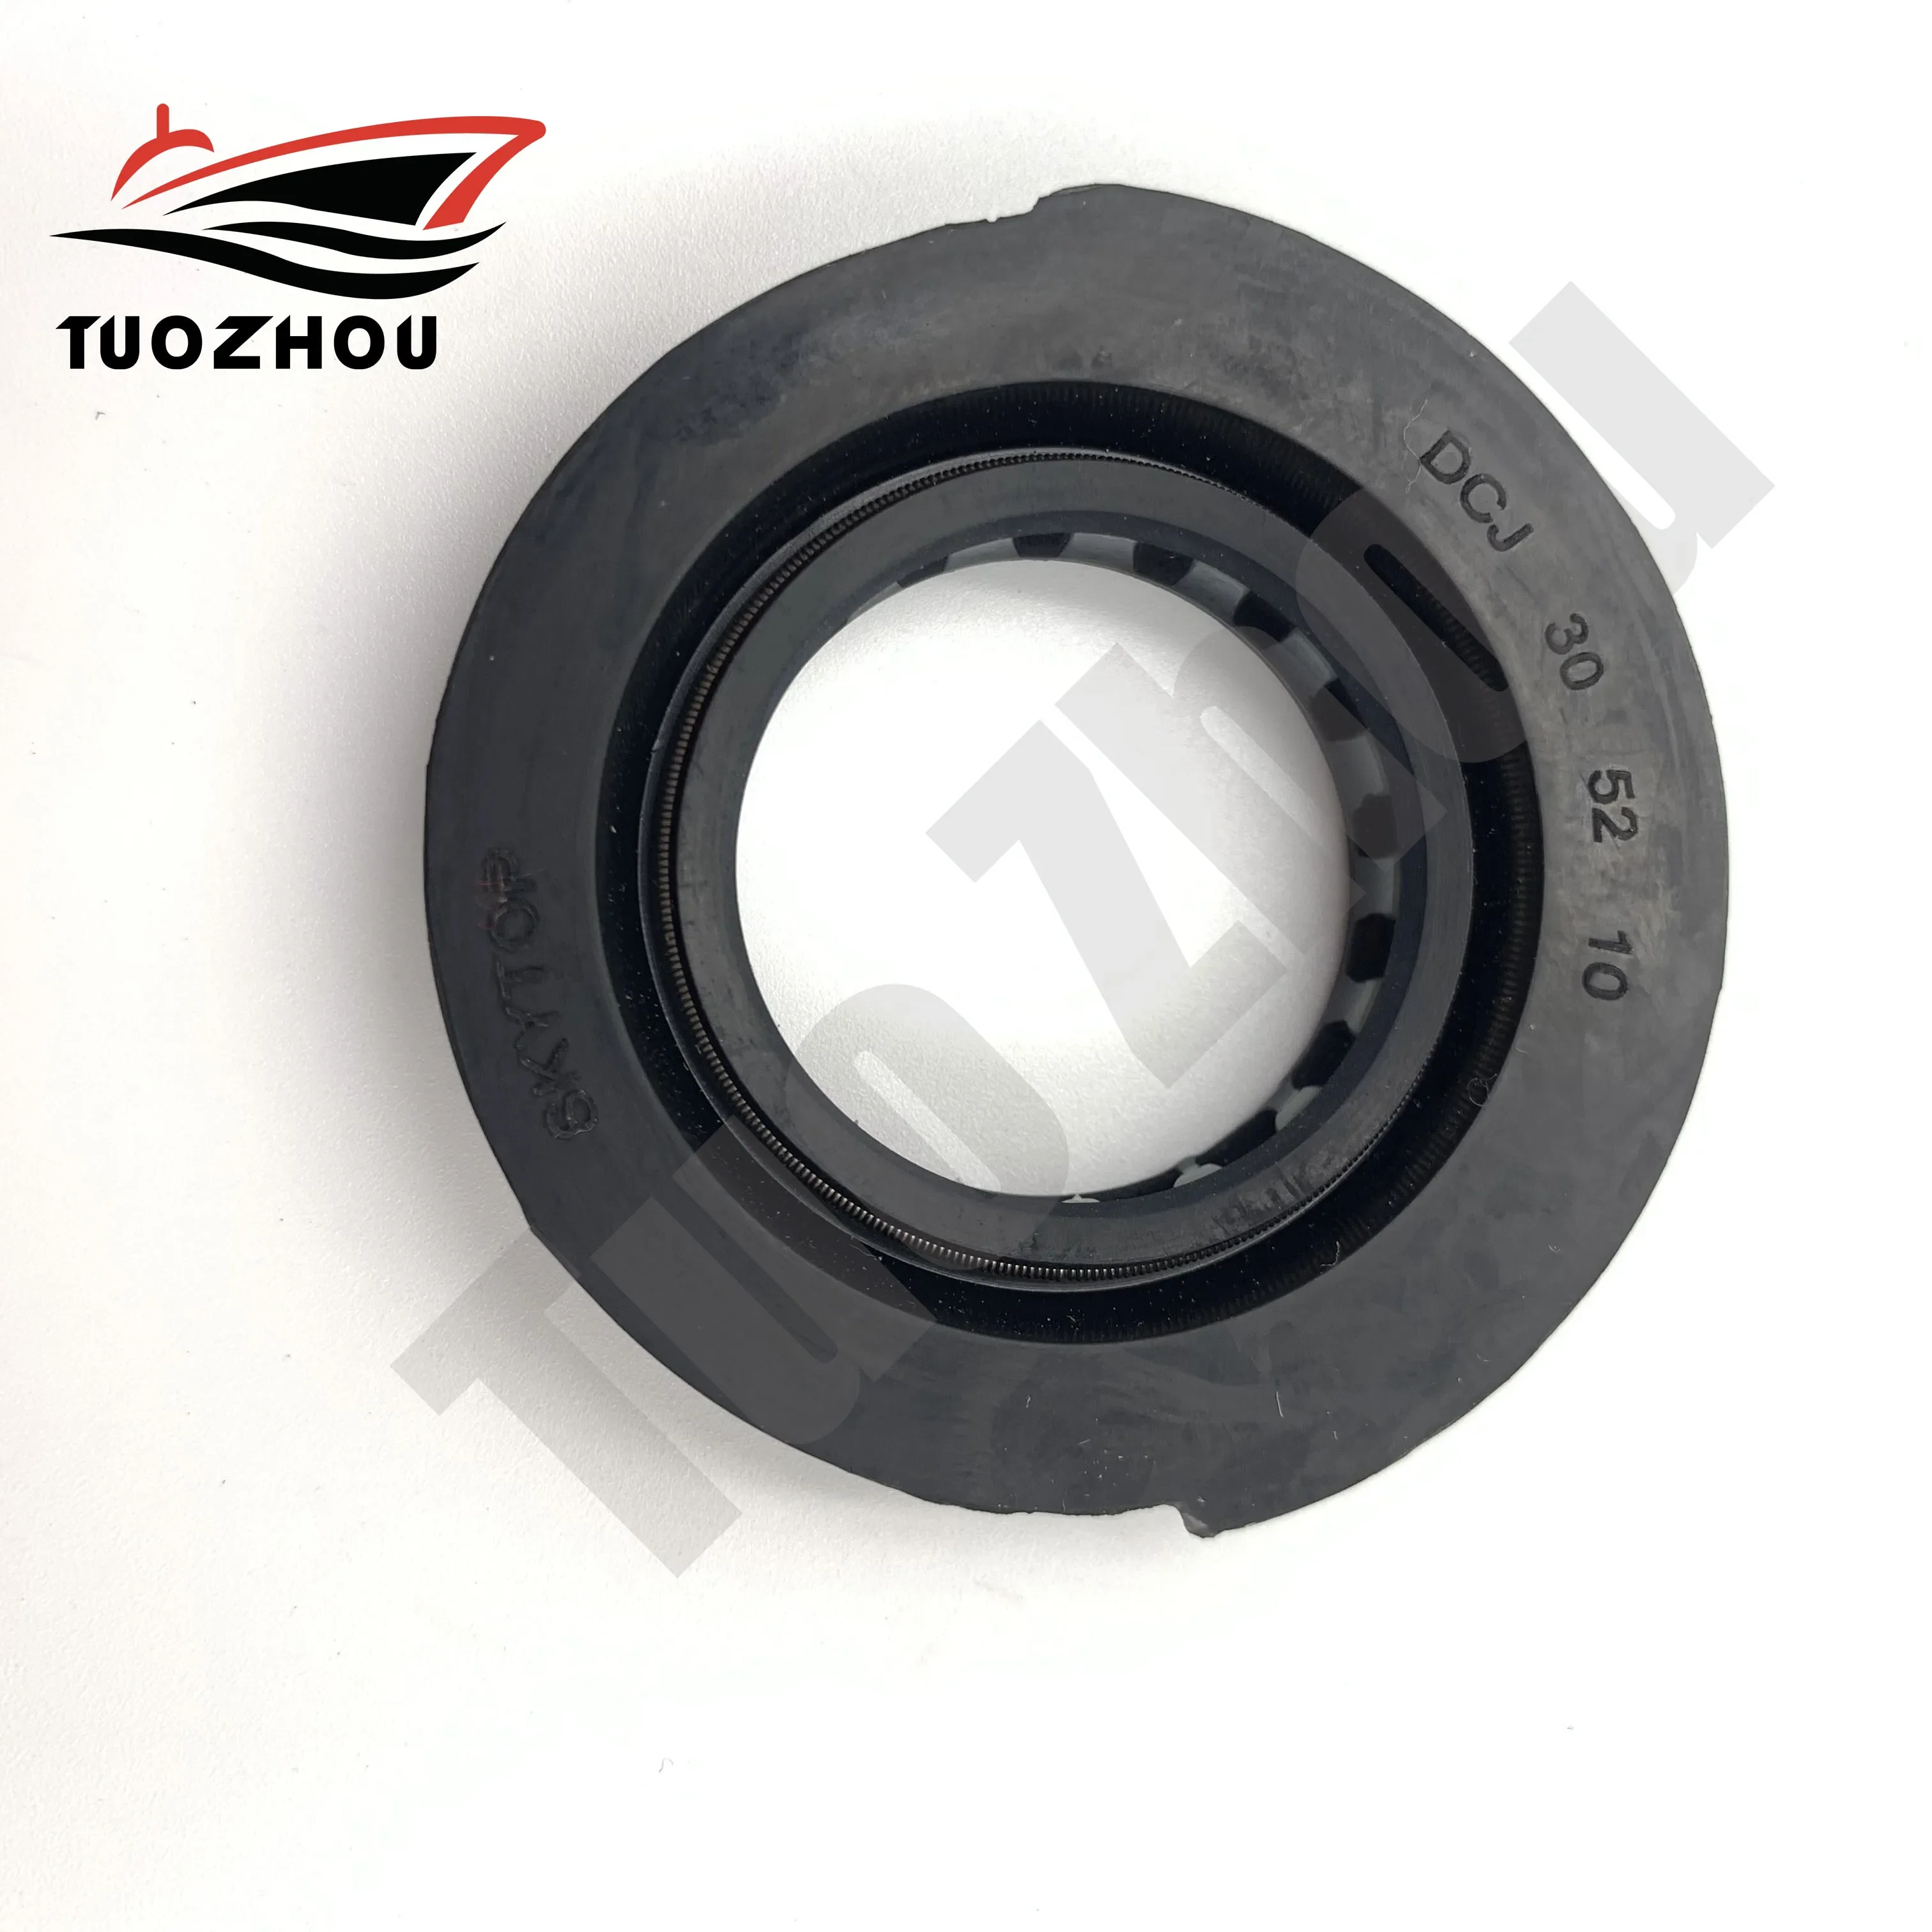 

09289-30008 Oil Seal For Suzuki Outboard Motor 2T DT9.9 15HP 20HP 25HP 28HP